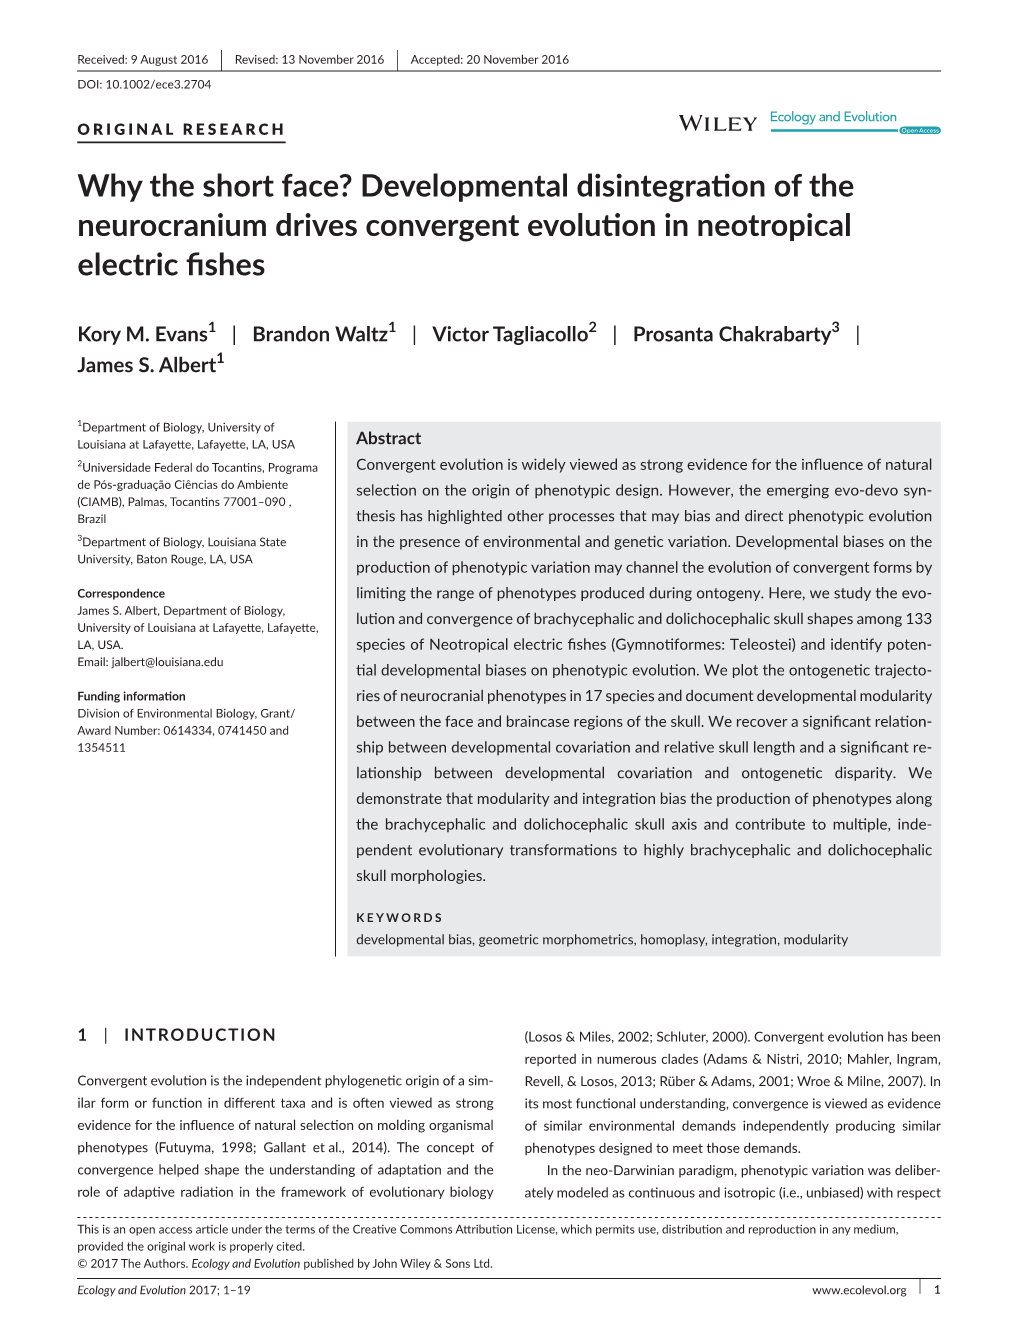 Why the Short Face? Developmental Disintegration of the Neurocranium Drives Convergent Evolution in Neotropical Electric Fishes